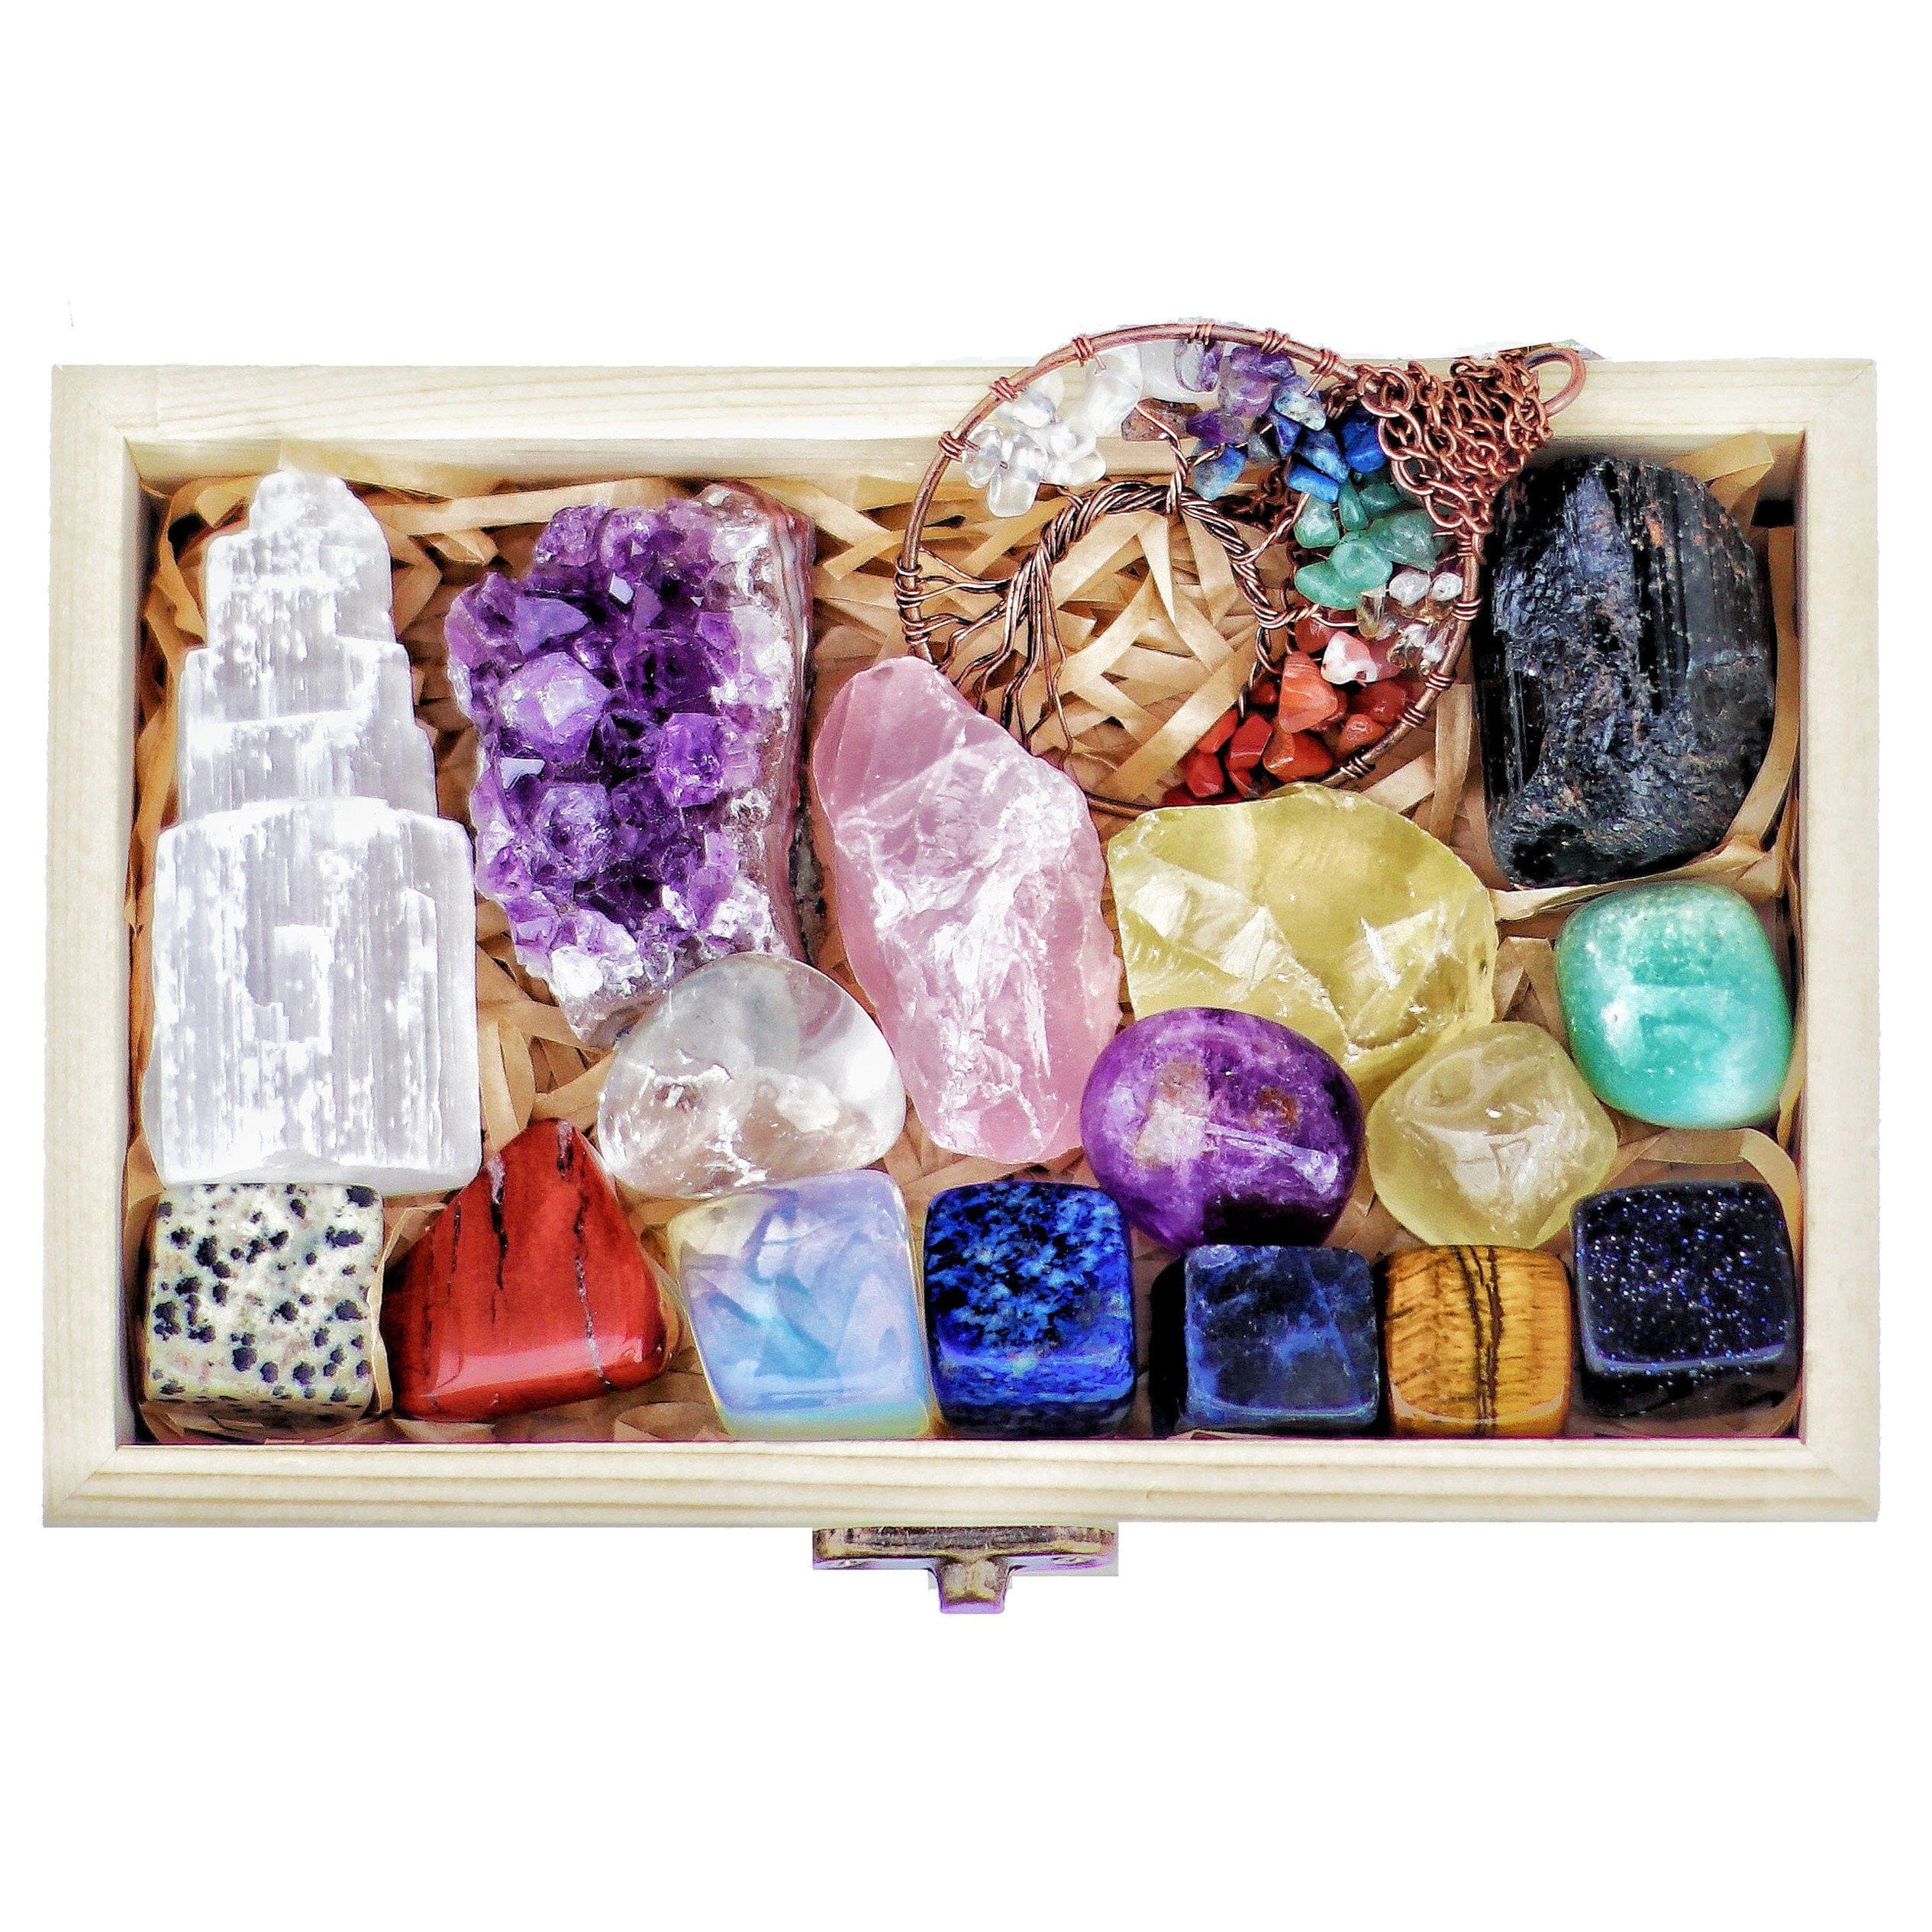 16 Natural Crystals Set for Stress and Anxiety Relief with Free Chakra Tree of Life Necklace 